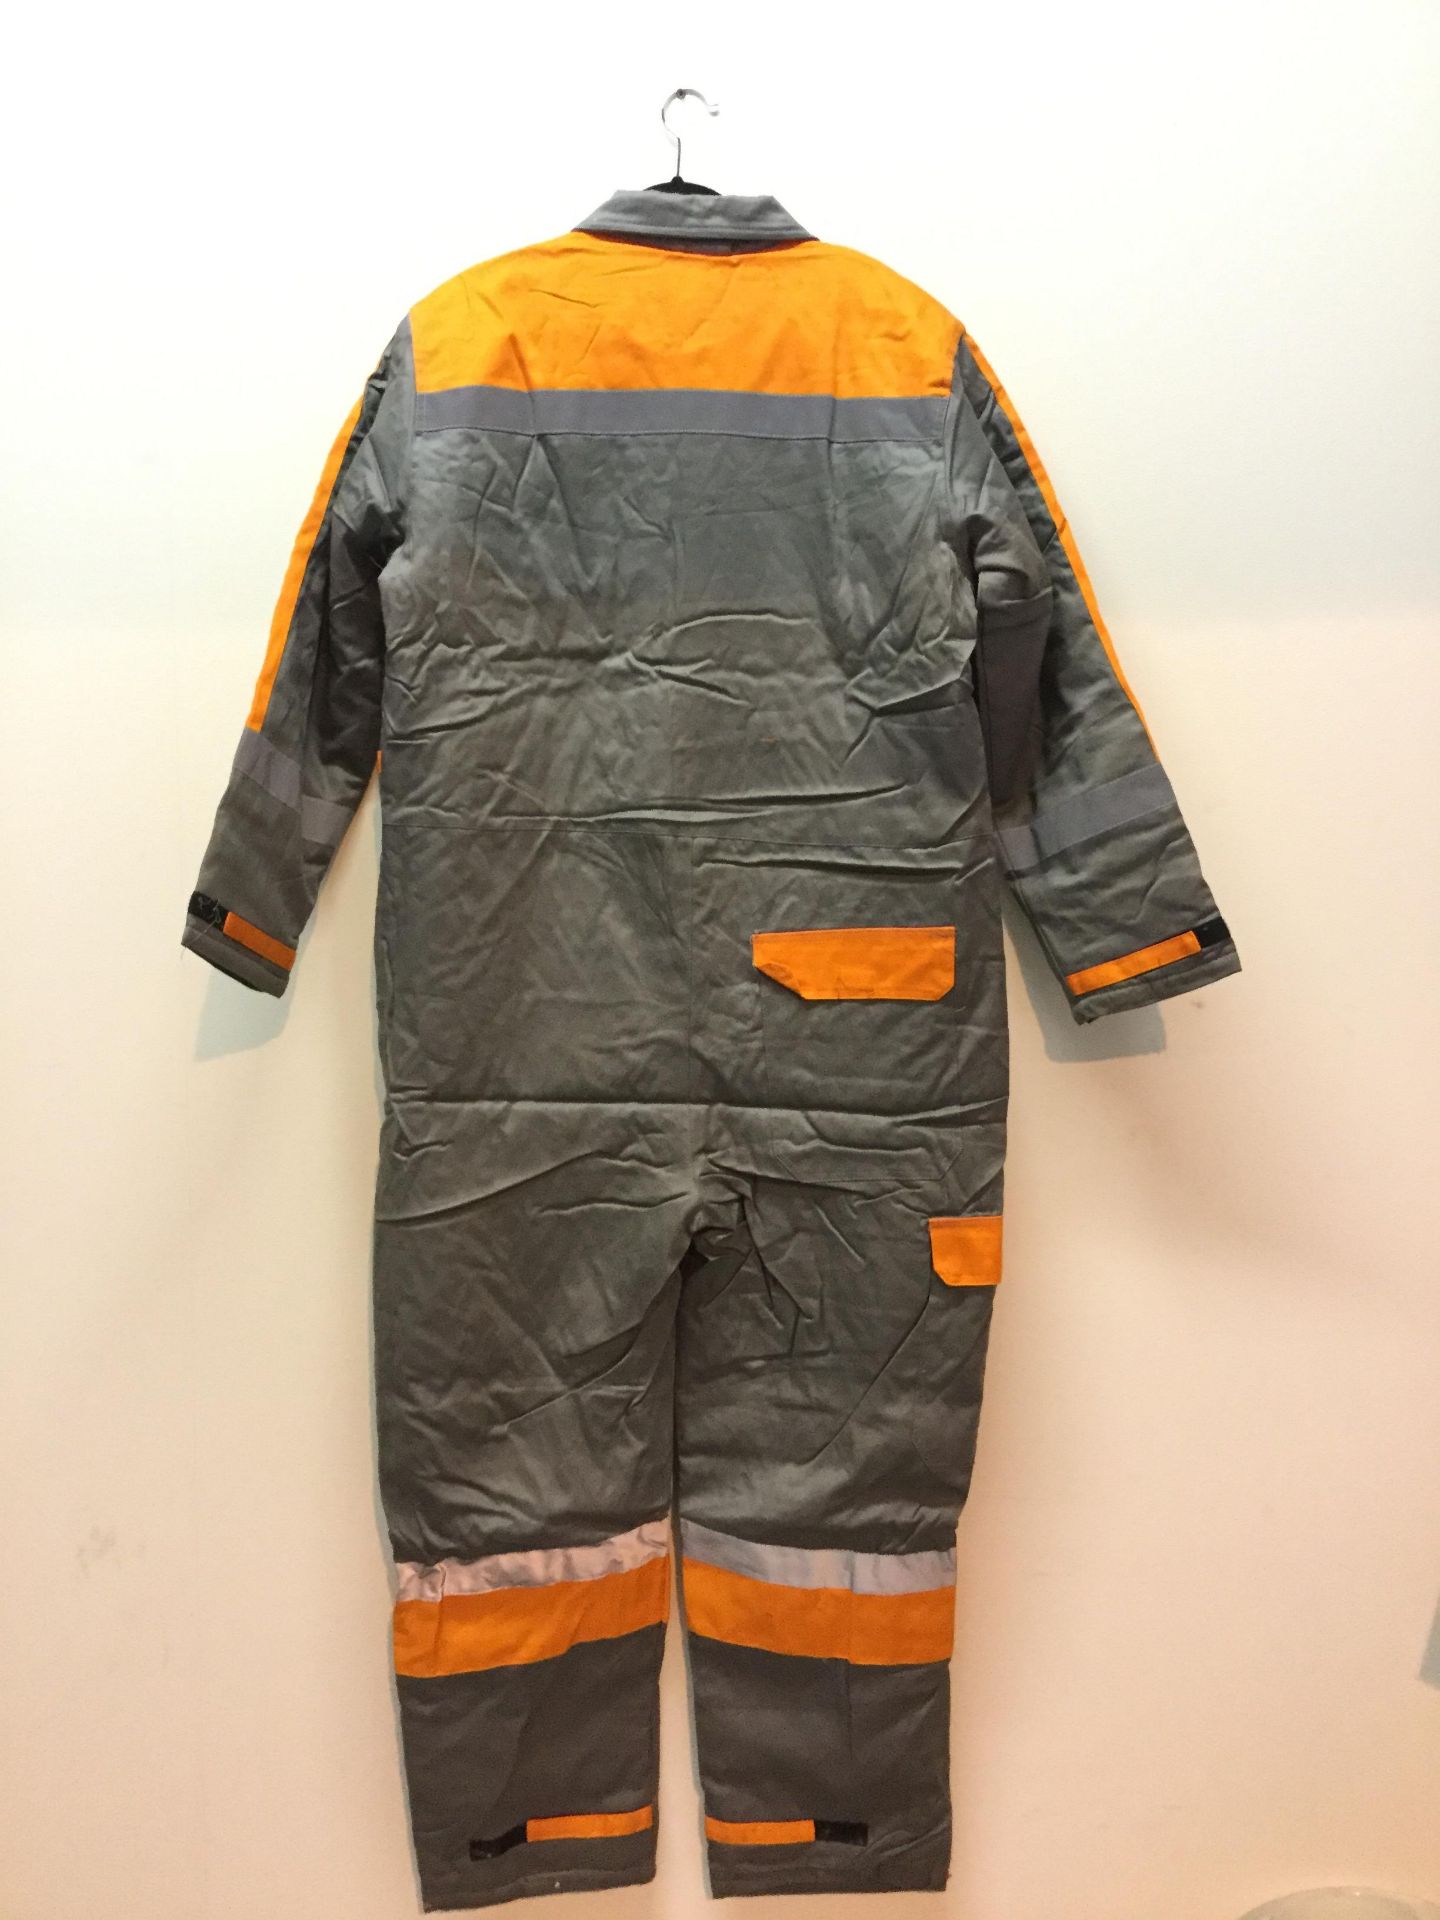 Flame Retardant Winter Coveralls - Size 46 - Image 3 of 3